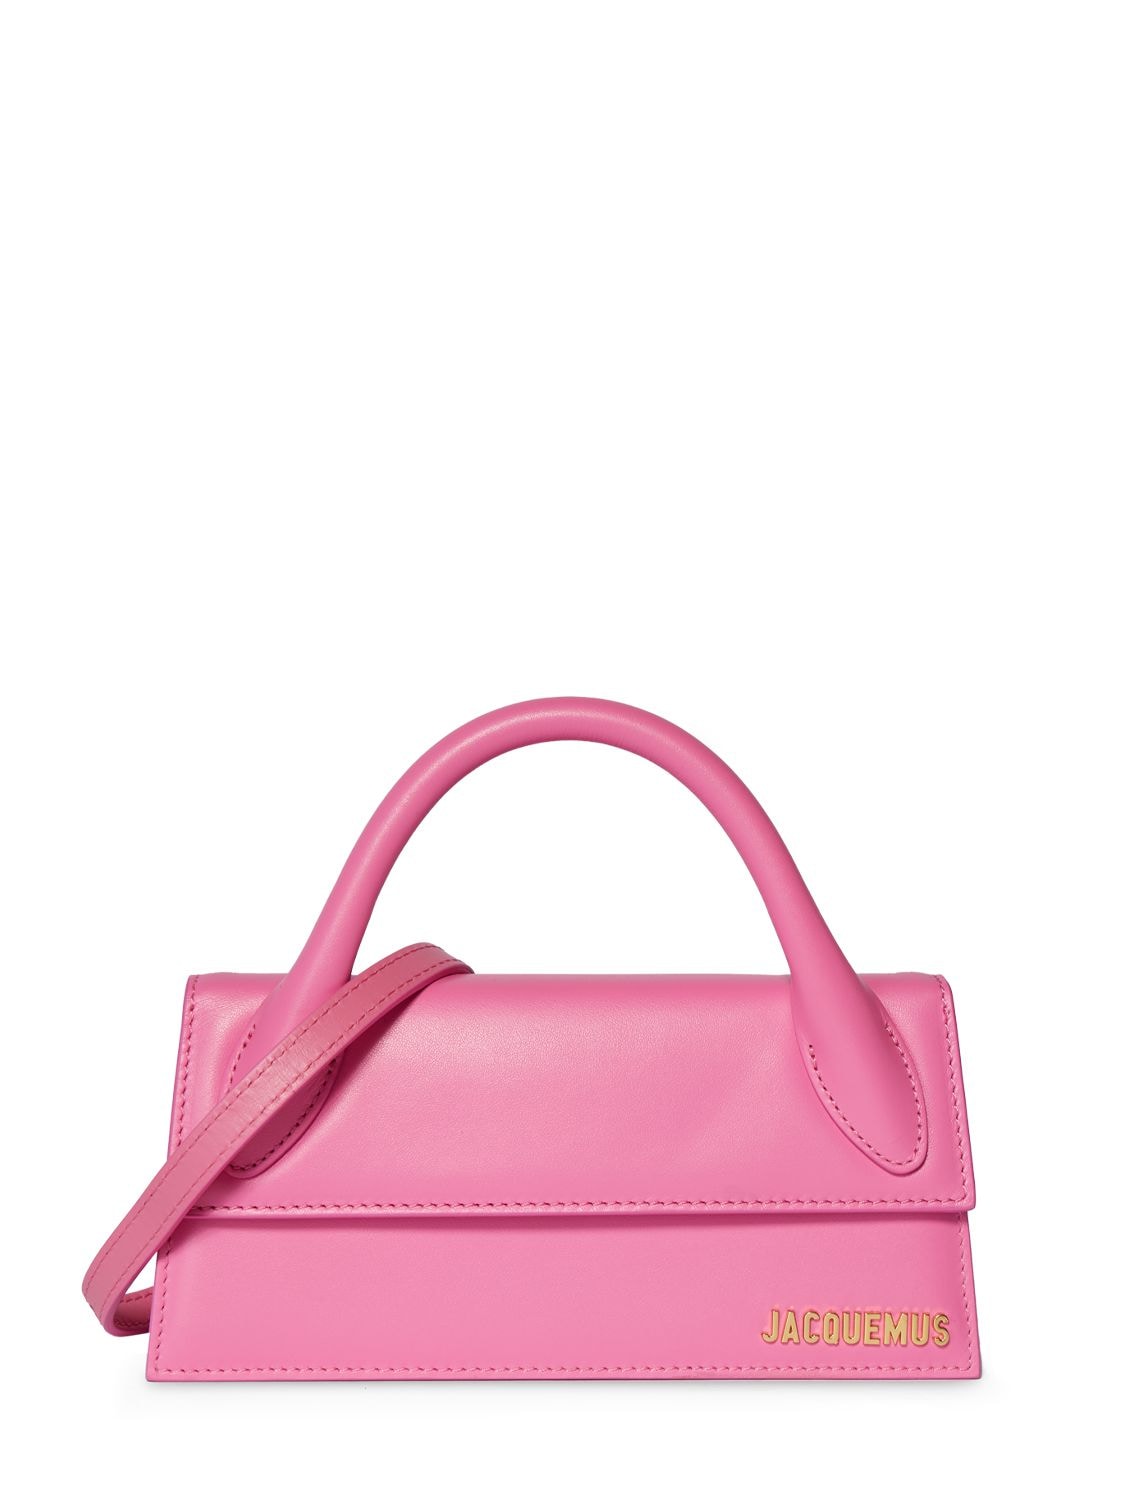 Jacquemus Le Chiquito Long Top-handle Bag In Neon Pink